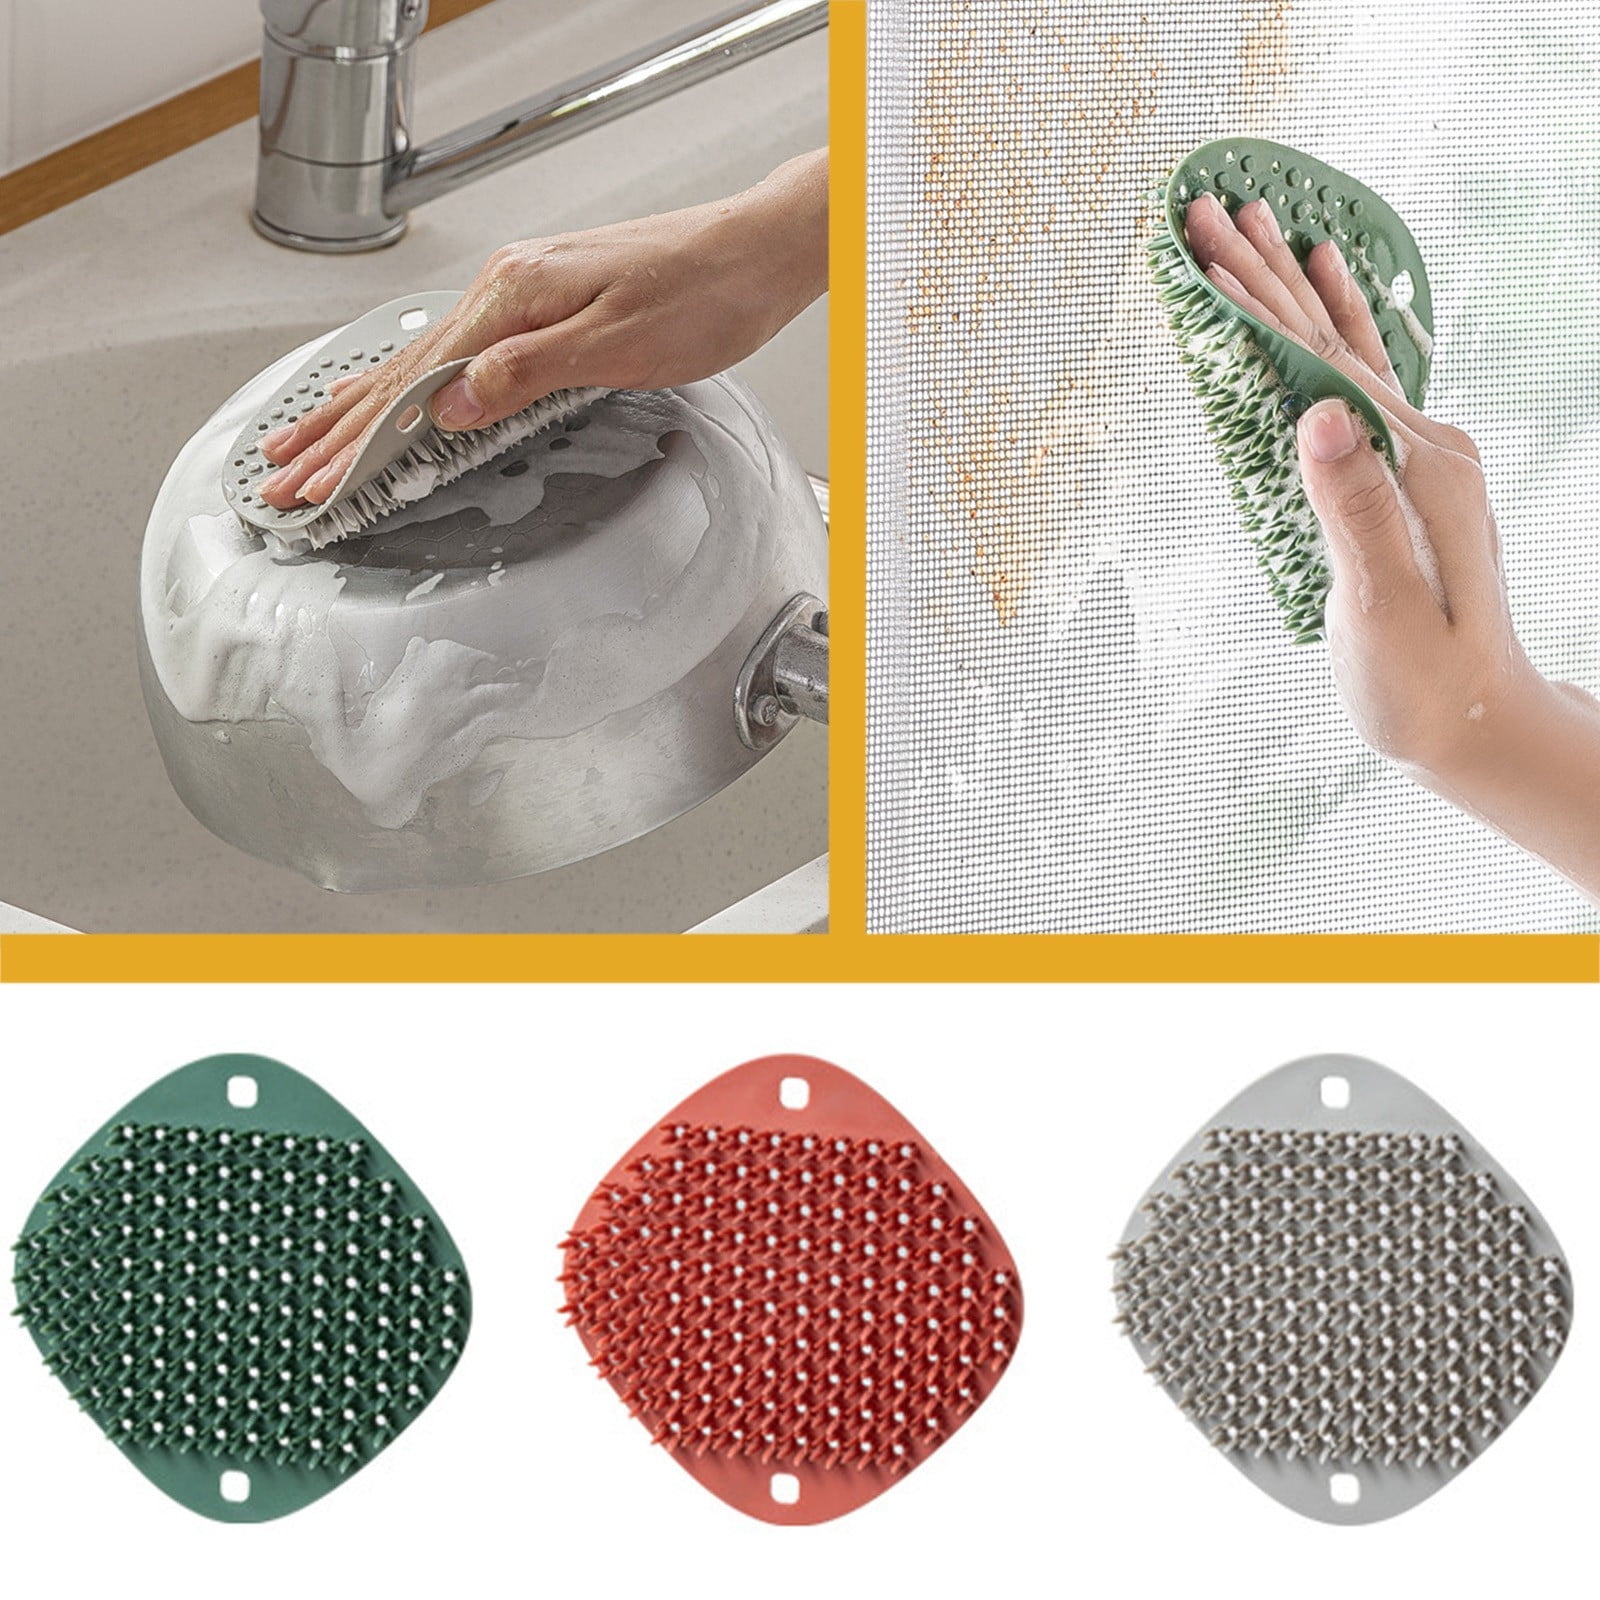 OAVQHLG3B Kitchen Sink Squeegee and Countertop Brush, Multi-Purpose, Cleans  Wet and Dry Spills, Dishwasher Safe